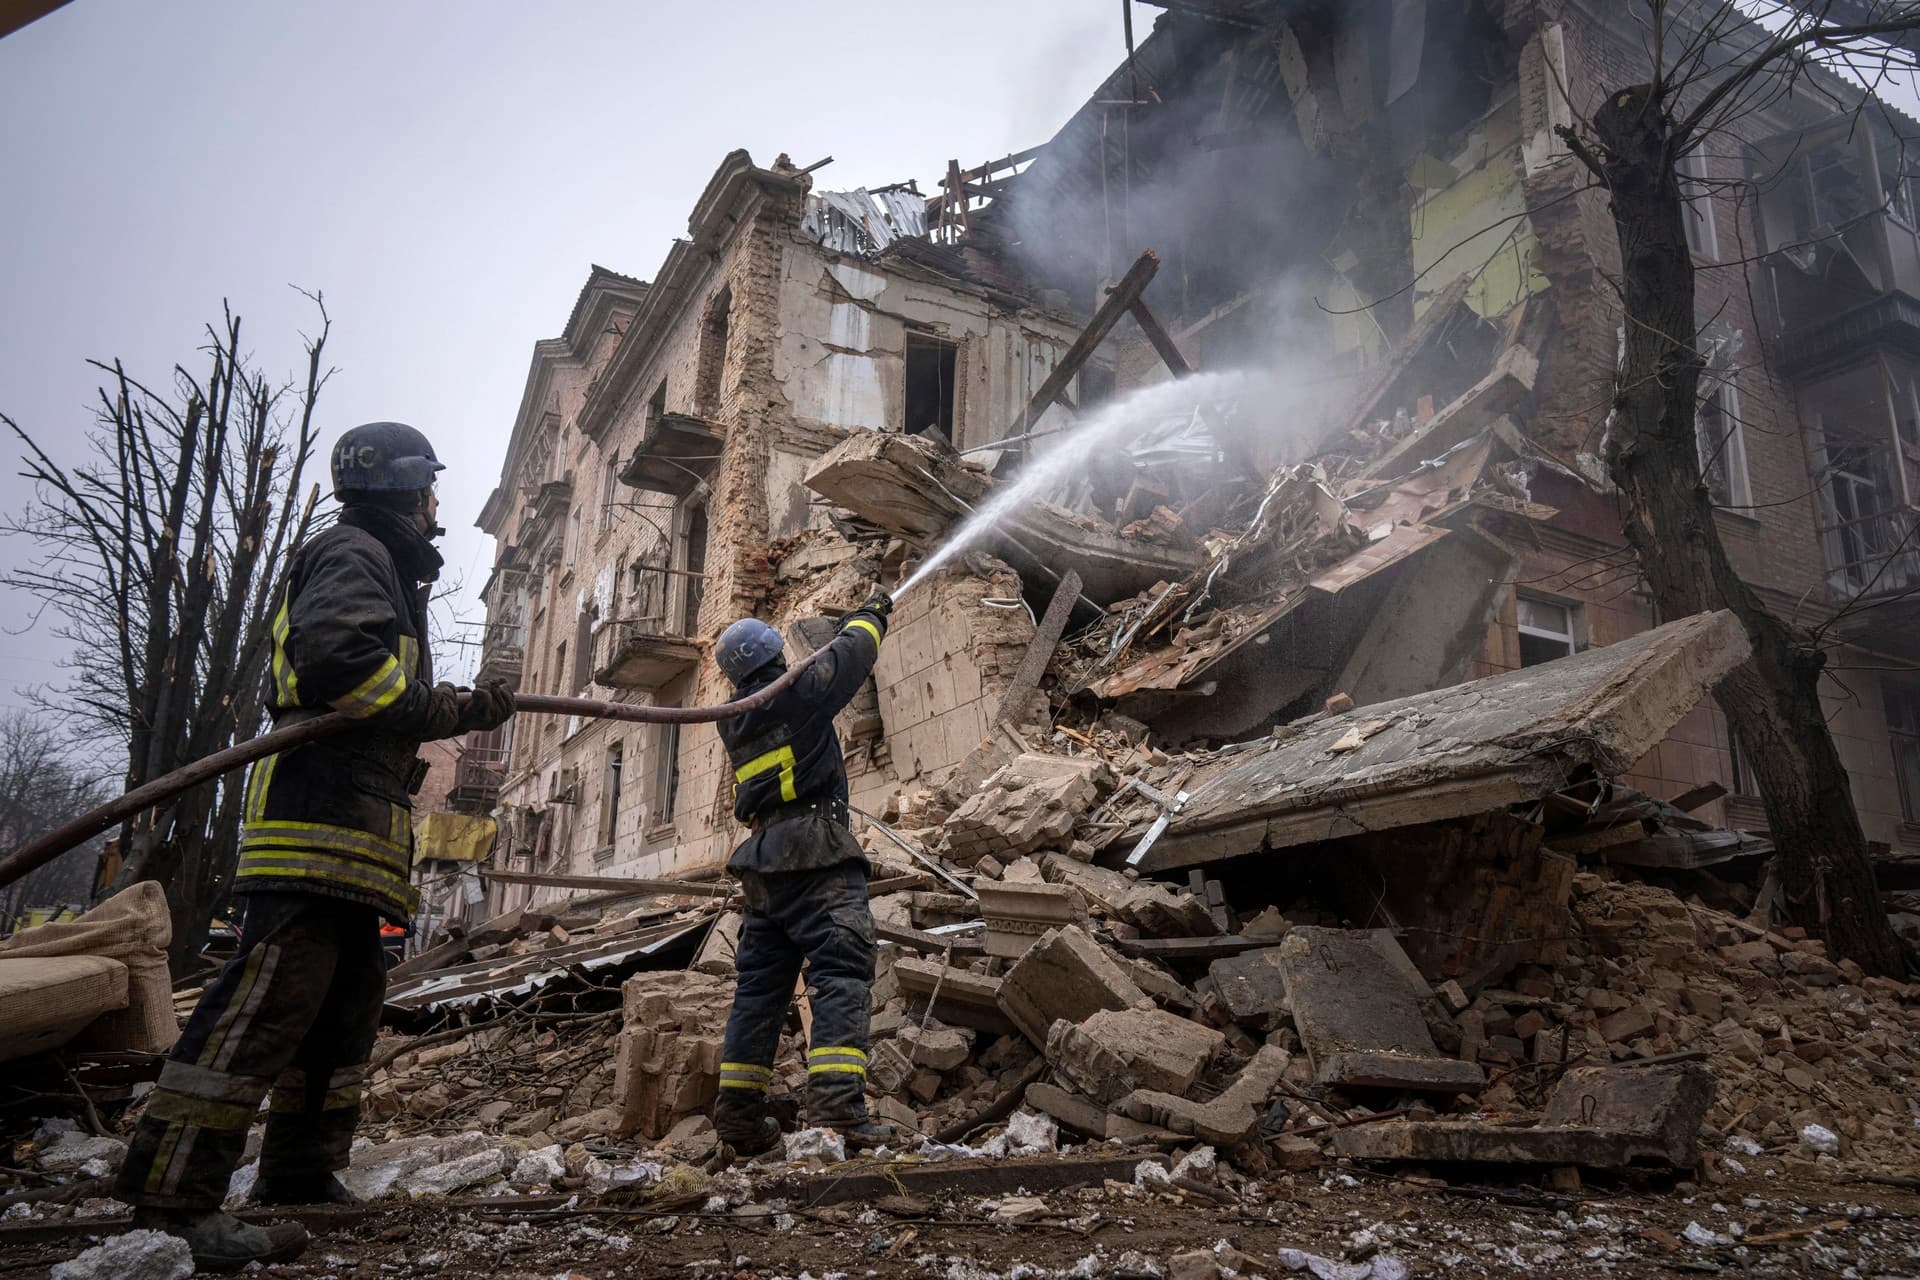 Ukrainian State Emergency Service firefighters work to extinguish a fire at the building which was destroyed by a Russian attack in Kryvyi Rih